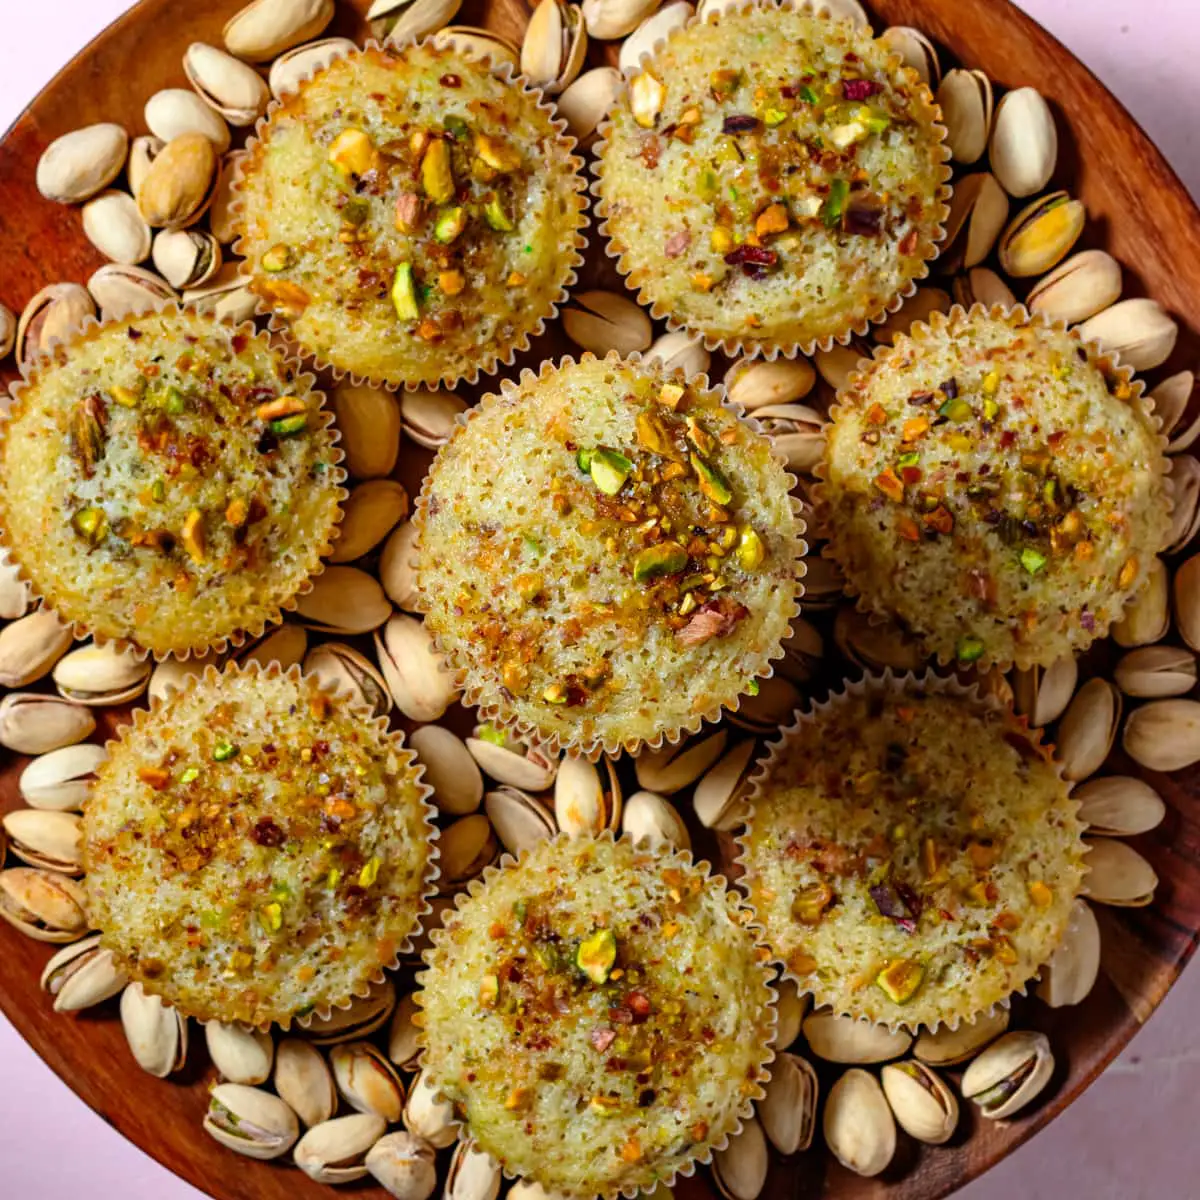 pistachio muffins on plate